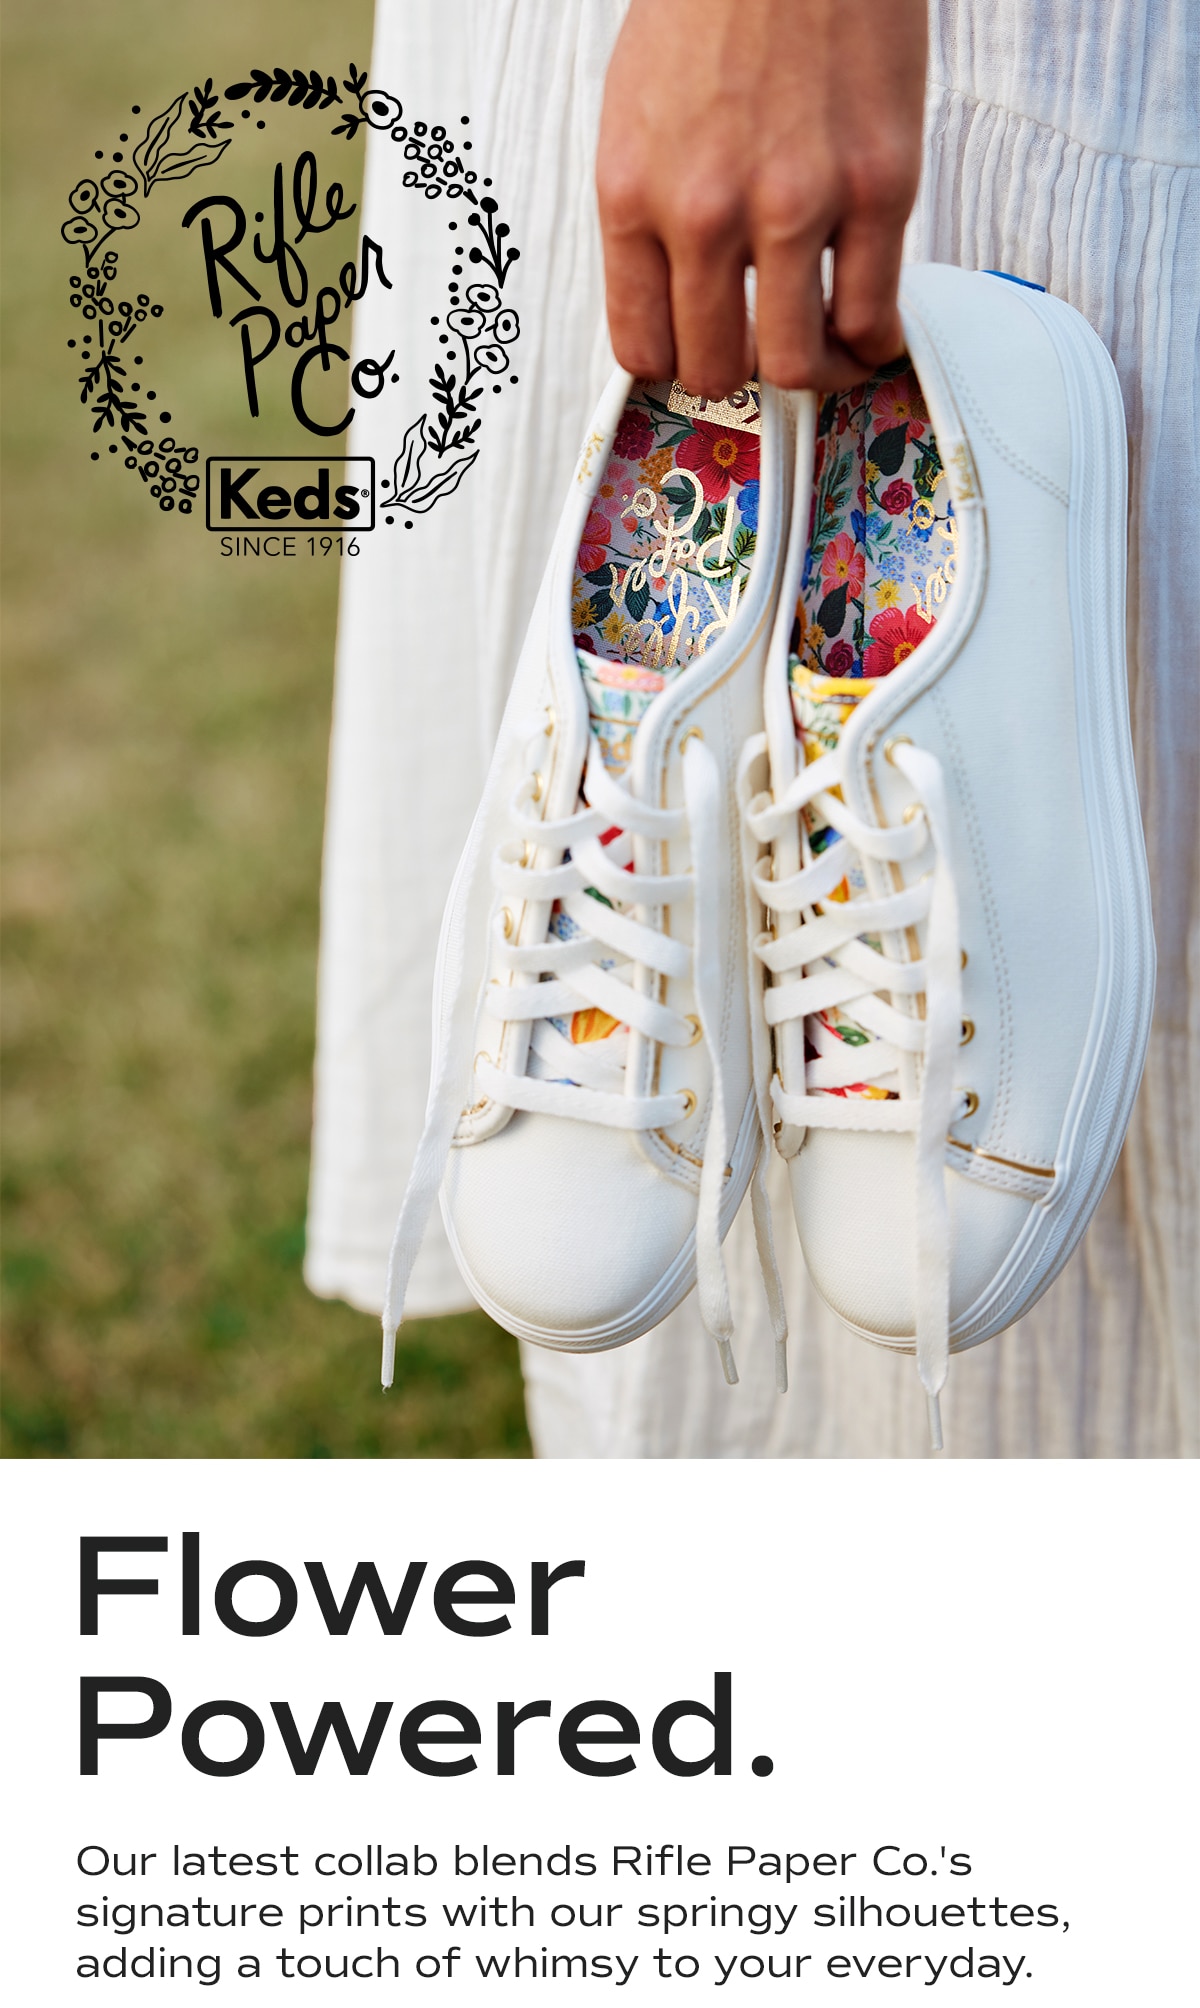 Rifle Paper Co. | Keds SINCE 1916 | Flower Powered. Our latest collab blends Rifle Paper Co.'s signature prints with our springy silhouettes, adding a touch of whimsy to your everyday.